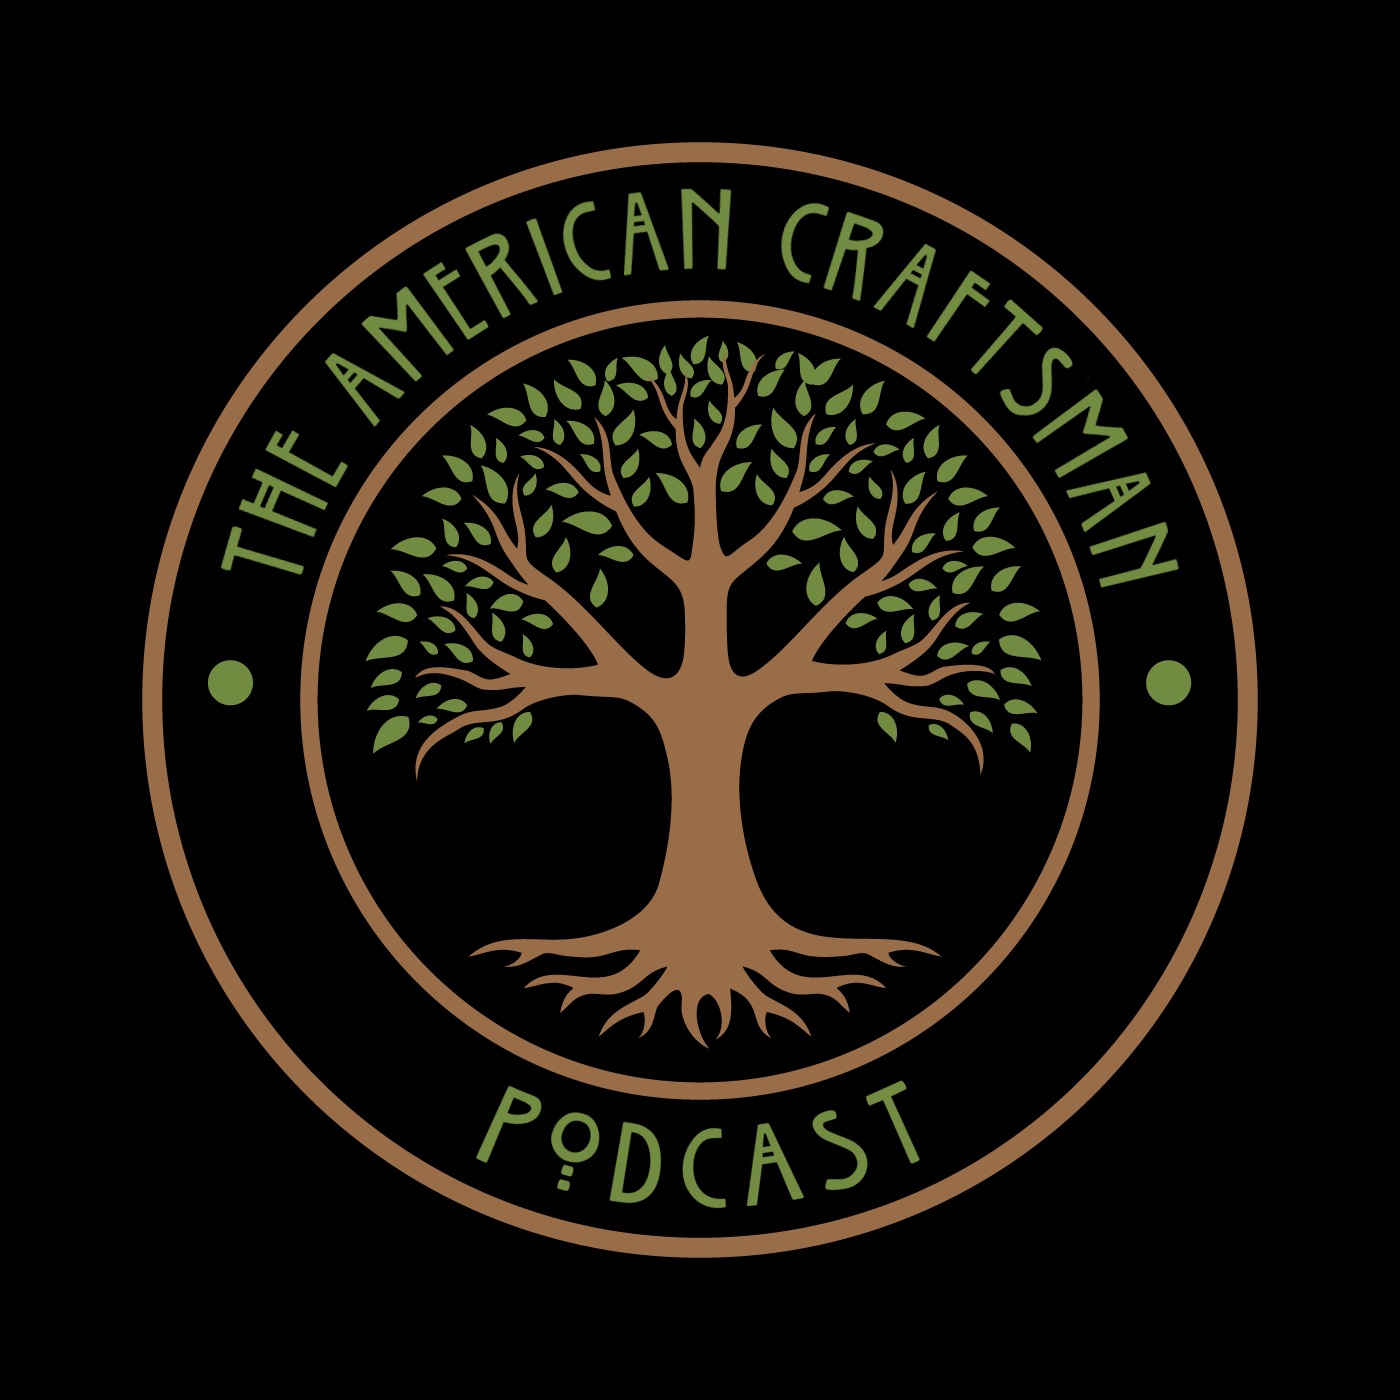 The American Craftsman Podcast: New Shop, Who Dis? Season 2, Episode 47.